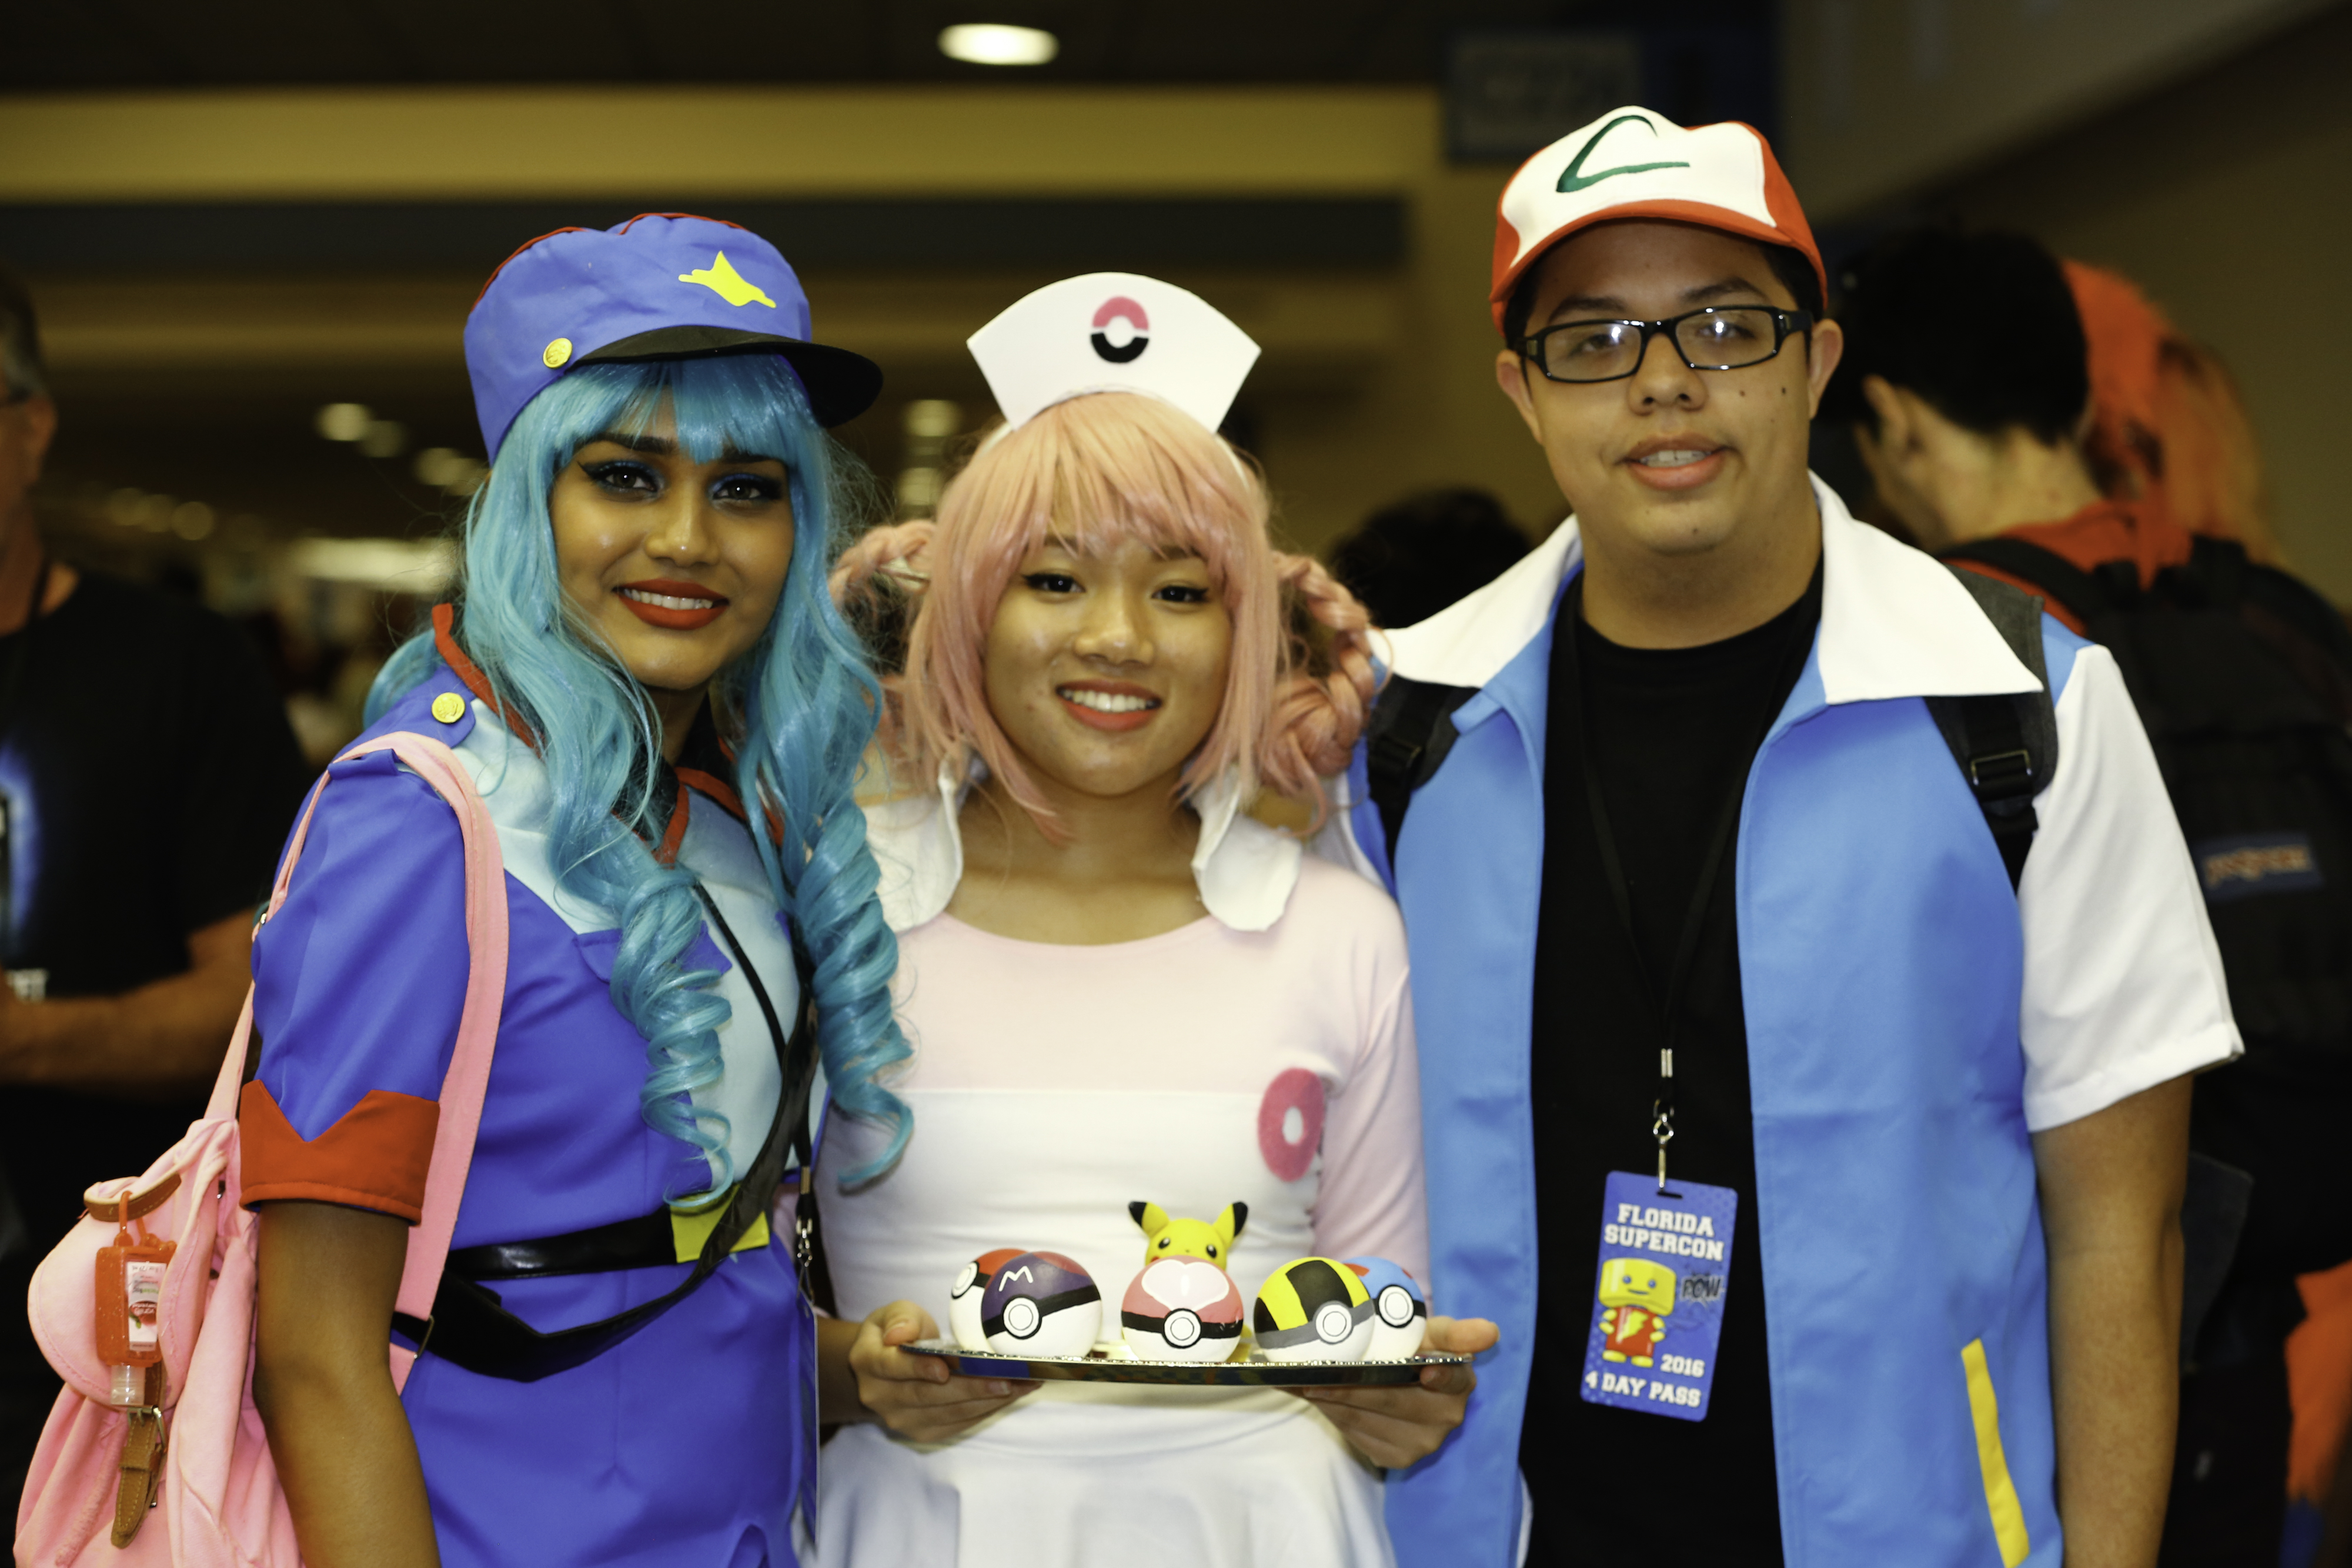 Cosplayers dressed as characters from Pokemon.